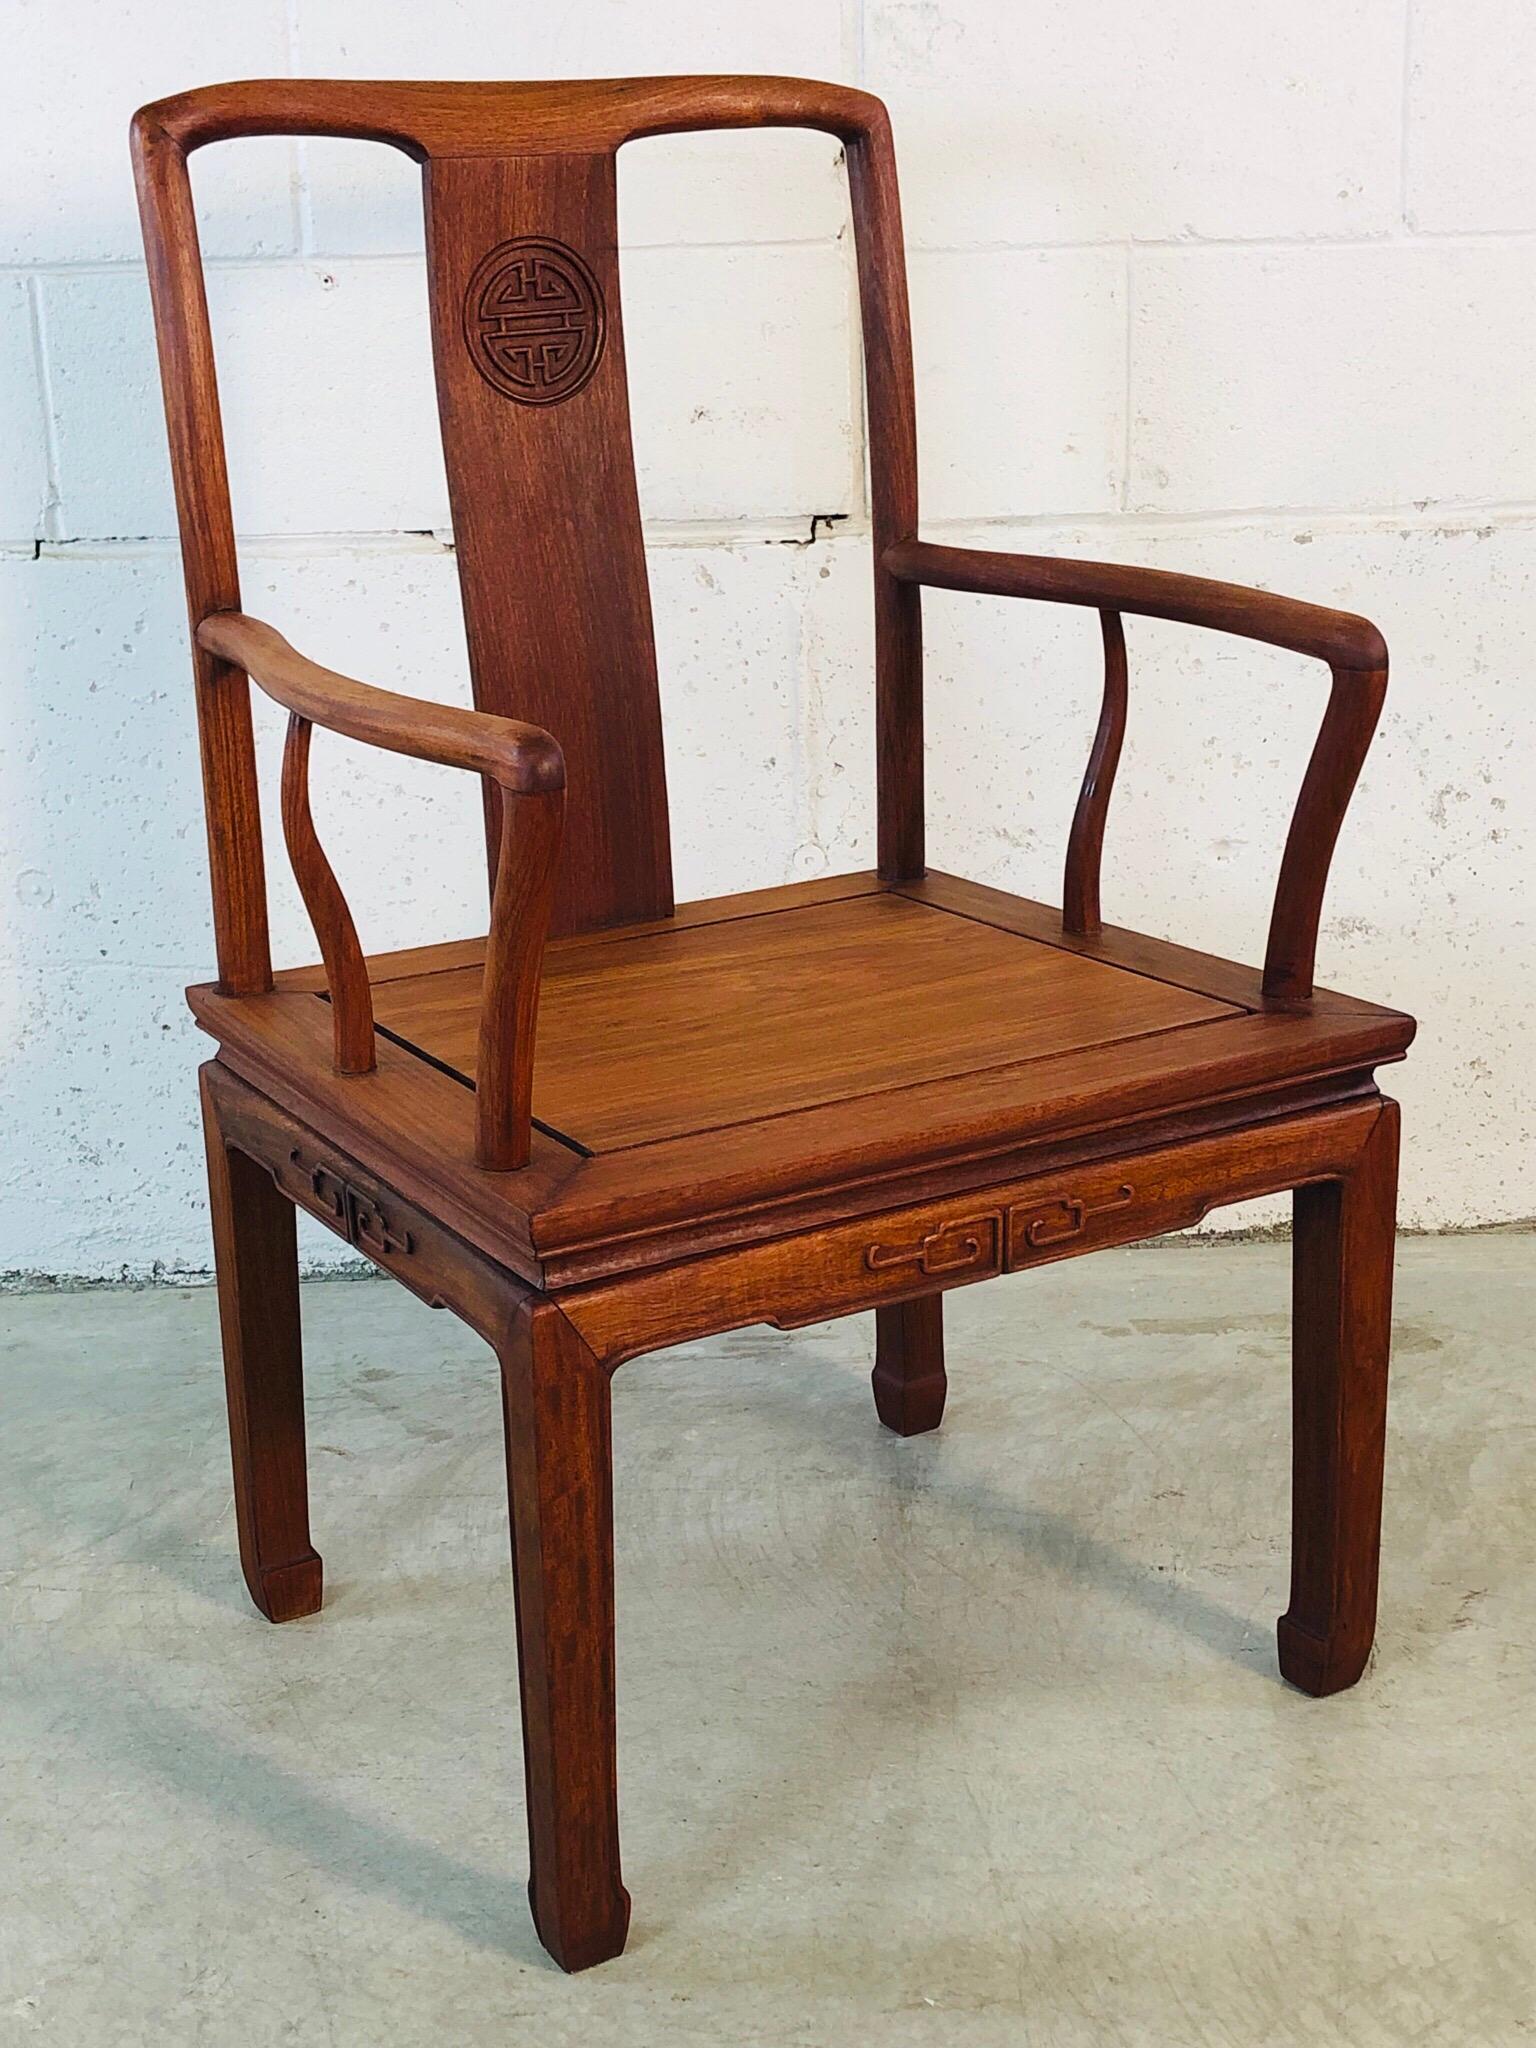 Mid-Century Modern 1960s Asian-Style teak hand carved arm chair. The chair has carved accents with curved arm details. Fully restored and refinished. No marks.